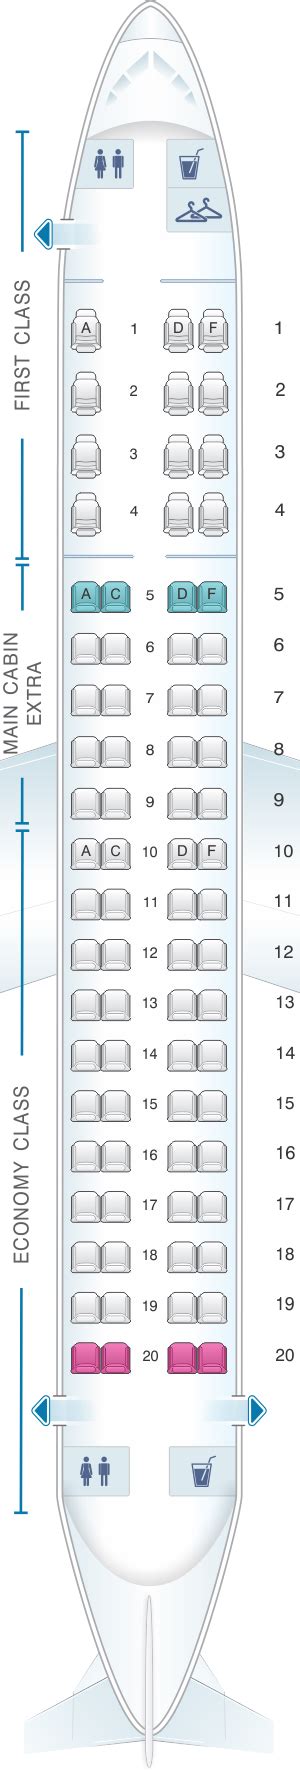 Embraer 175 american airlines seating сhart175 airlines american erj embraer seat map v1 seating plan united eagle charts aircraft seats seatmaestro class air maps airways American airlines embraer 175 (e75) seat map alaska airlines, deltaUnited airlines embraer 170 (e70) seat map.. 